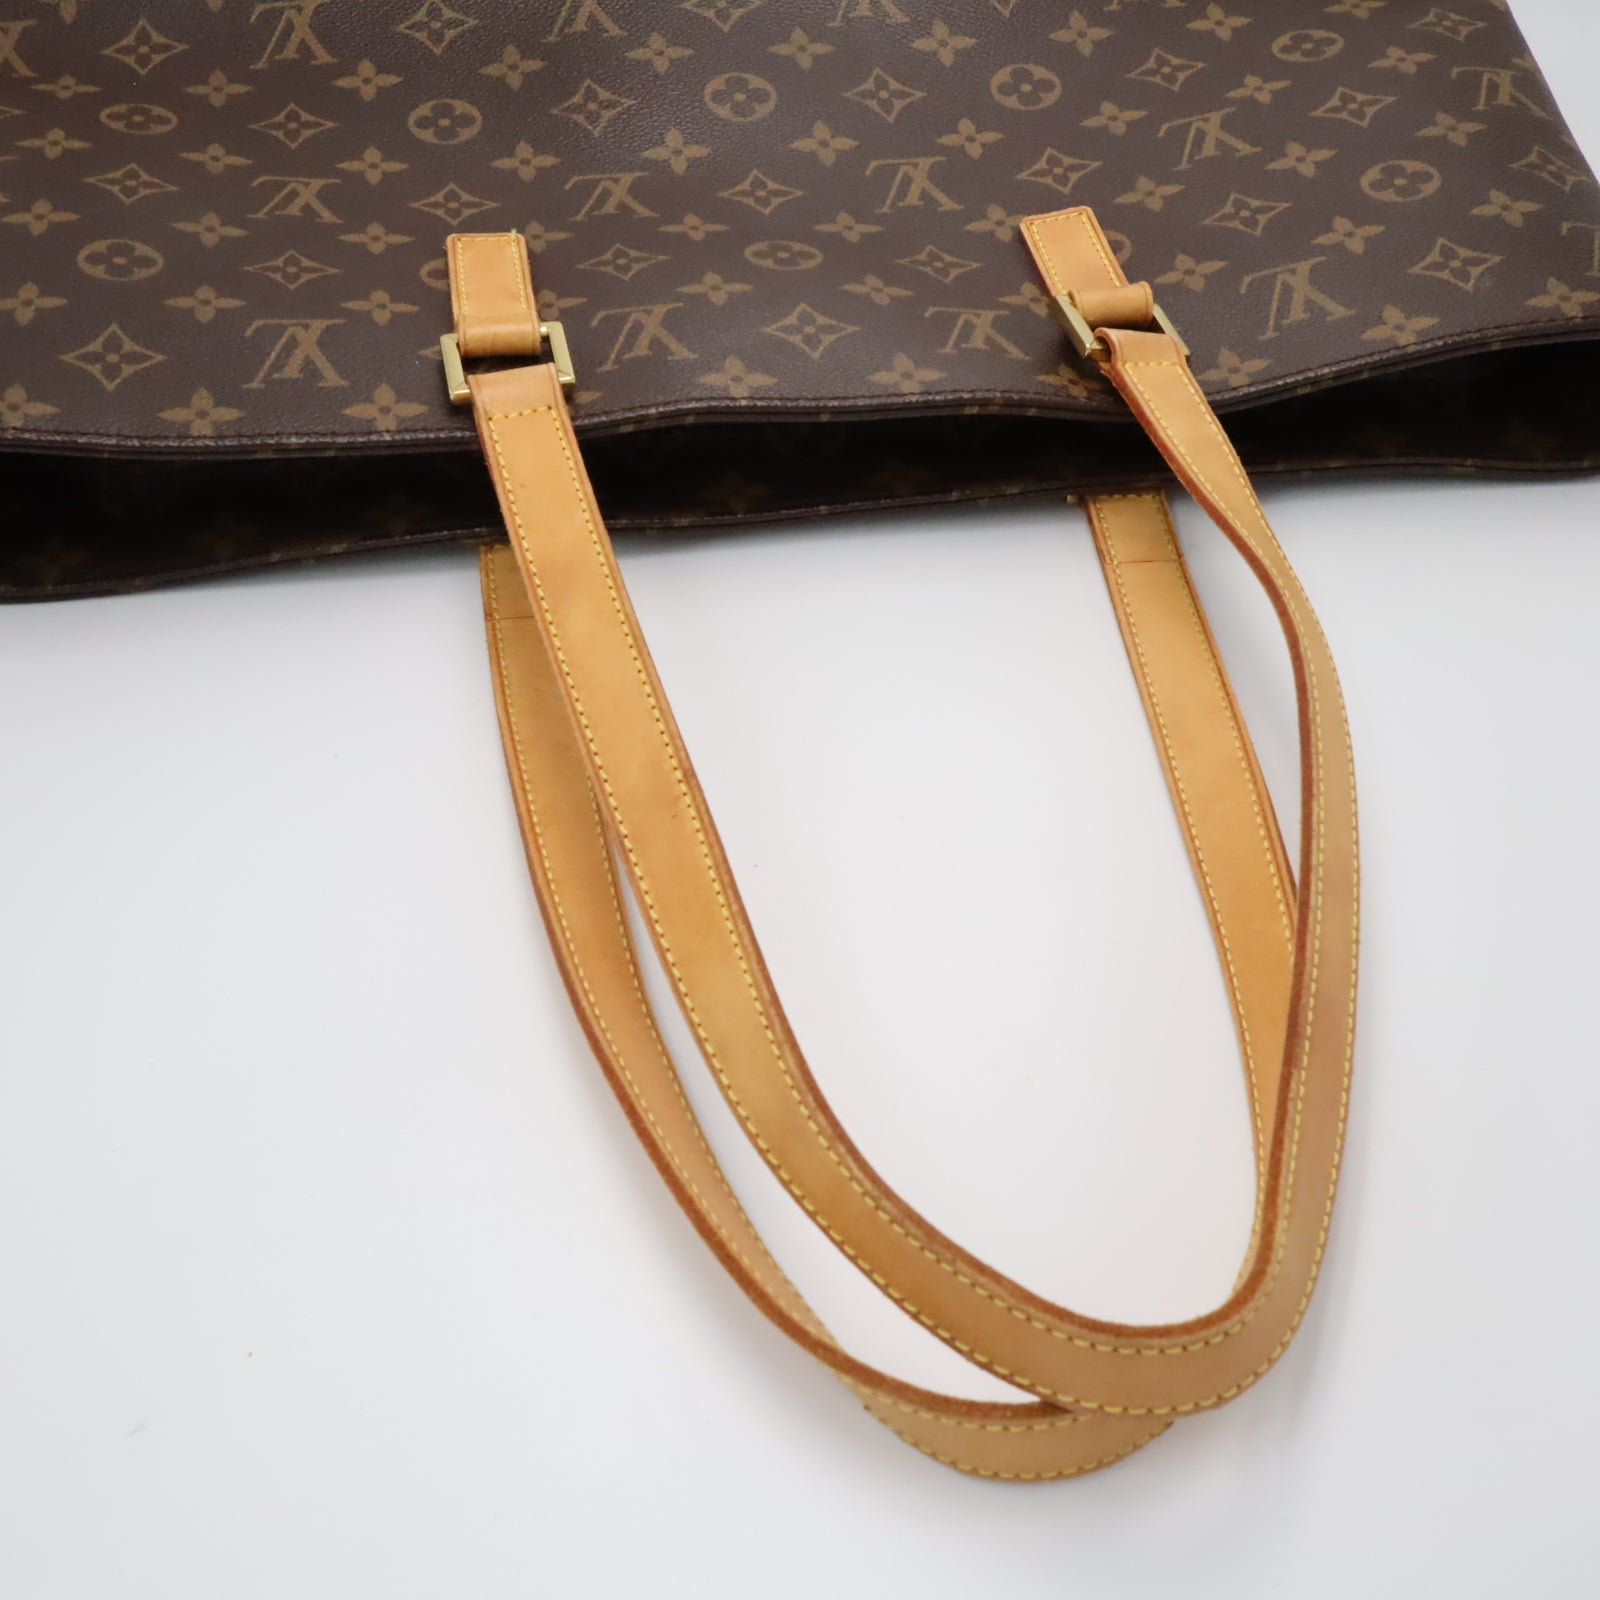 Authenticated Used LOUIS VUITTON Louis Vuitton Monogram Ruco Tote